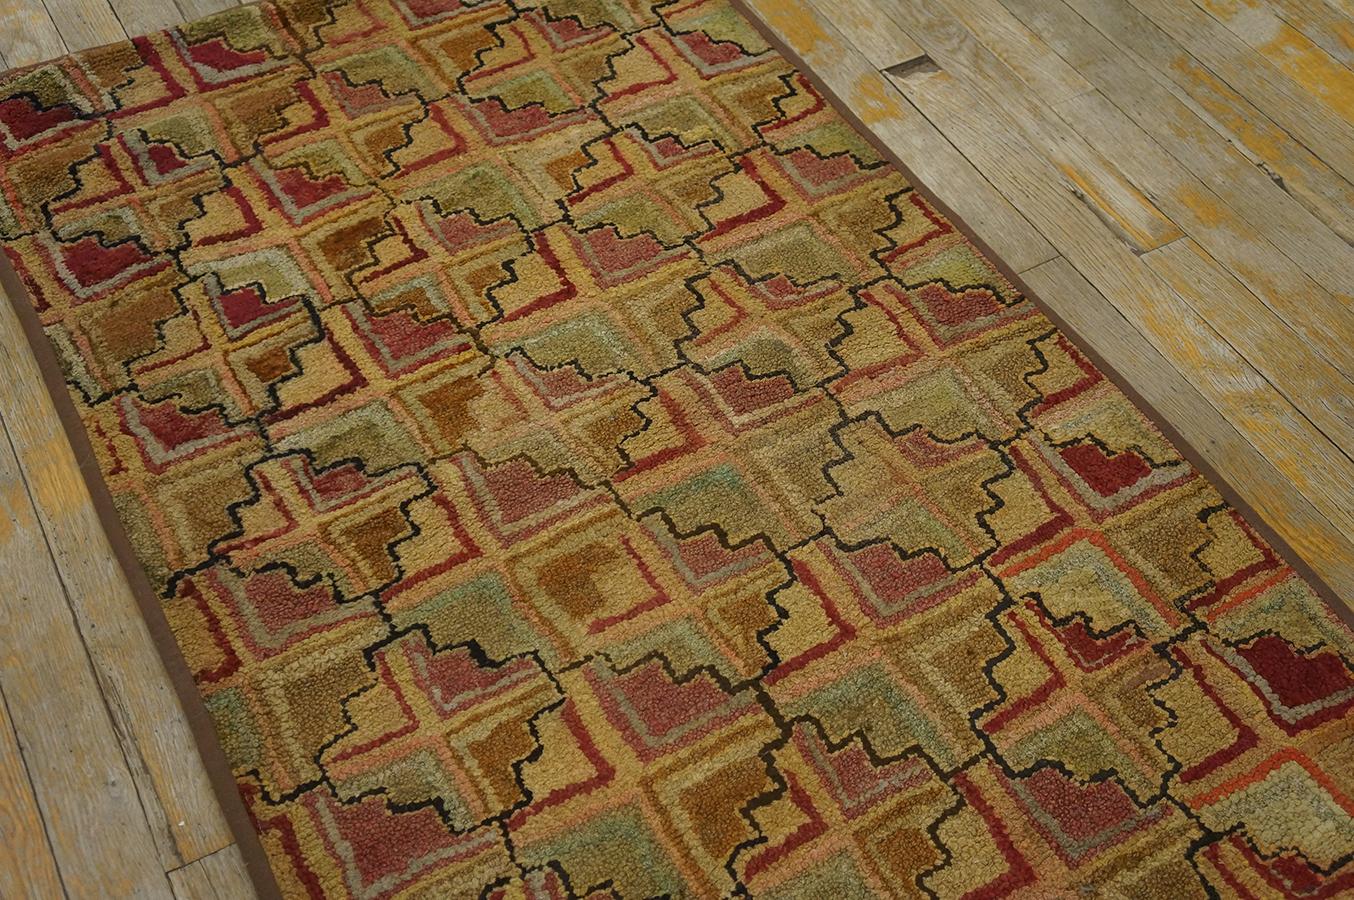 Early 20th Century American Hooked Rug  (2' 7'' x 5' - 78 x 152 cm ) For Sale 5